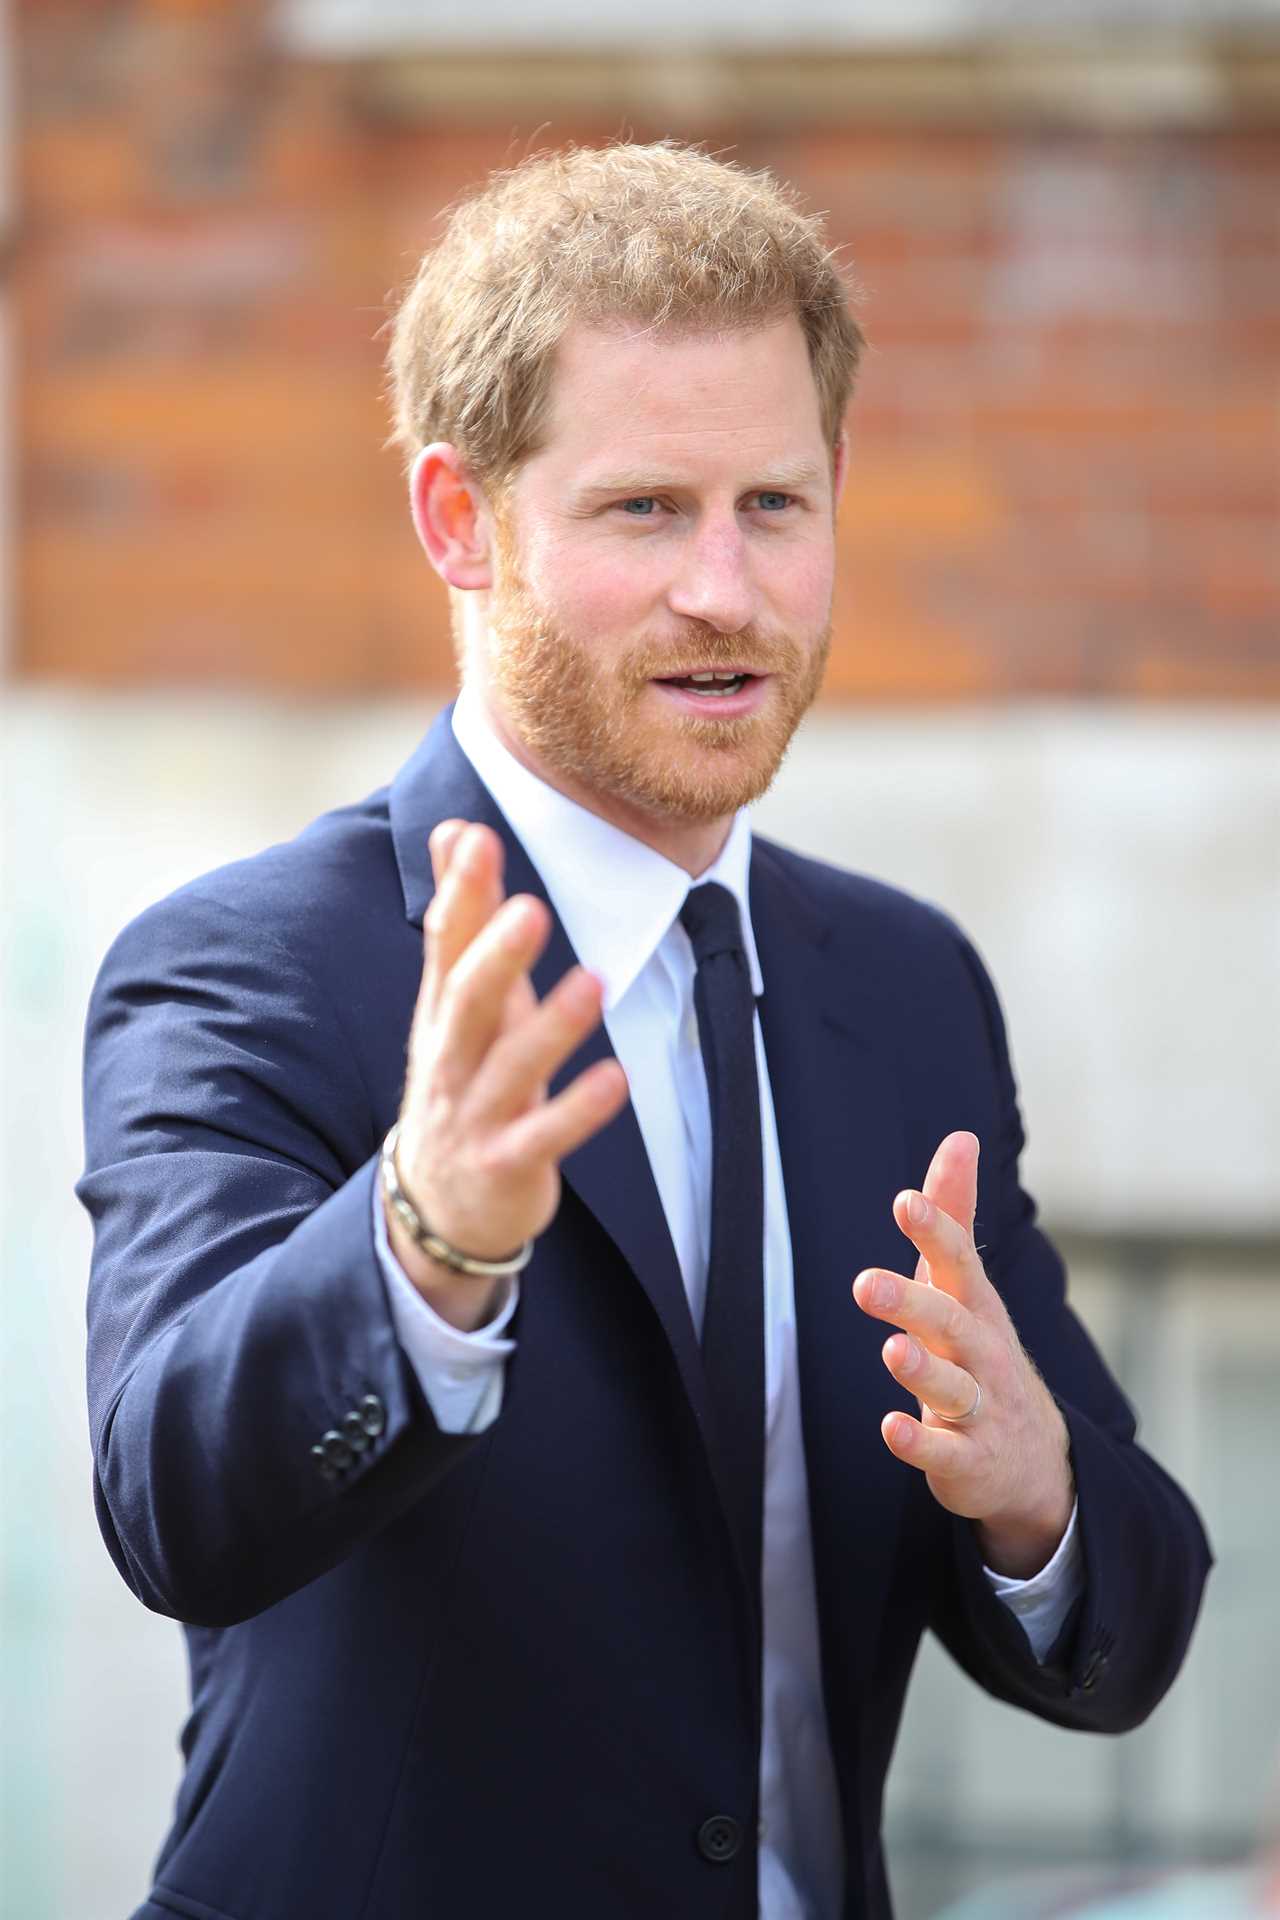 Prince Harry reveals the bizarre present Princess Margaret once gave him for Christmas